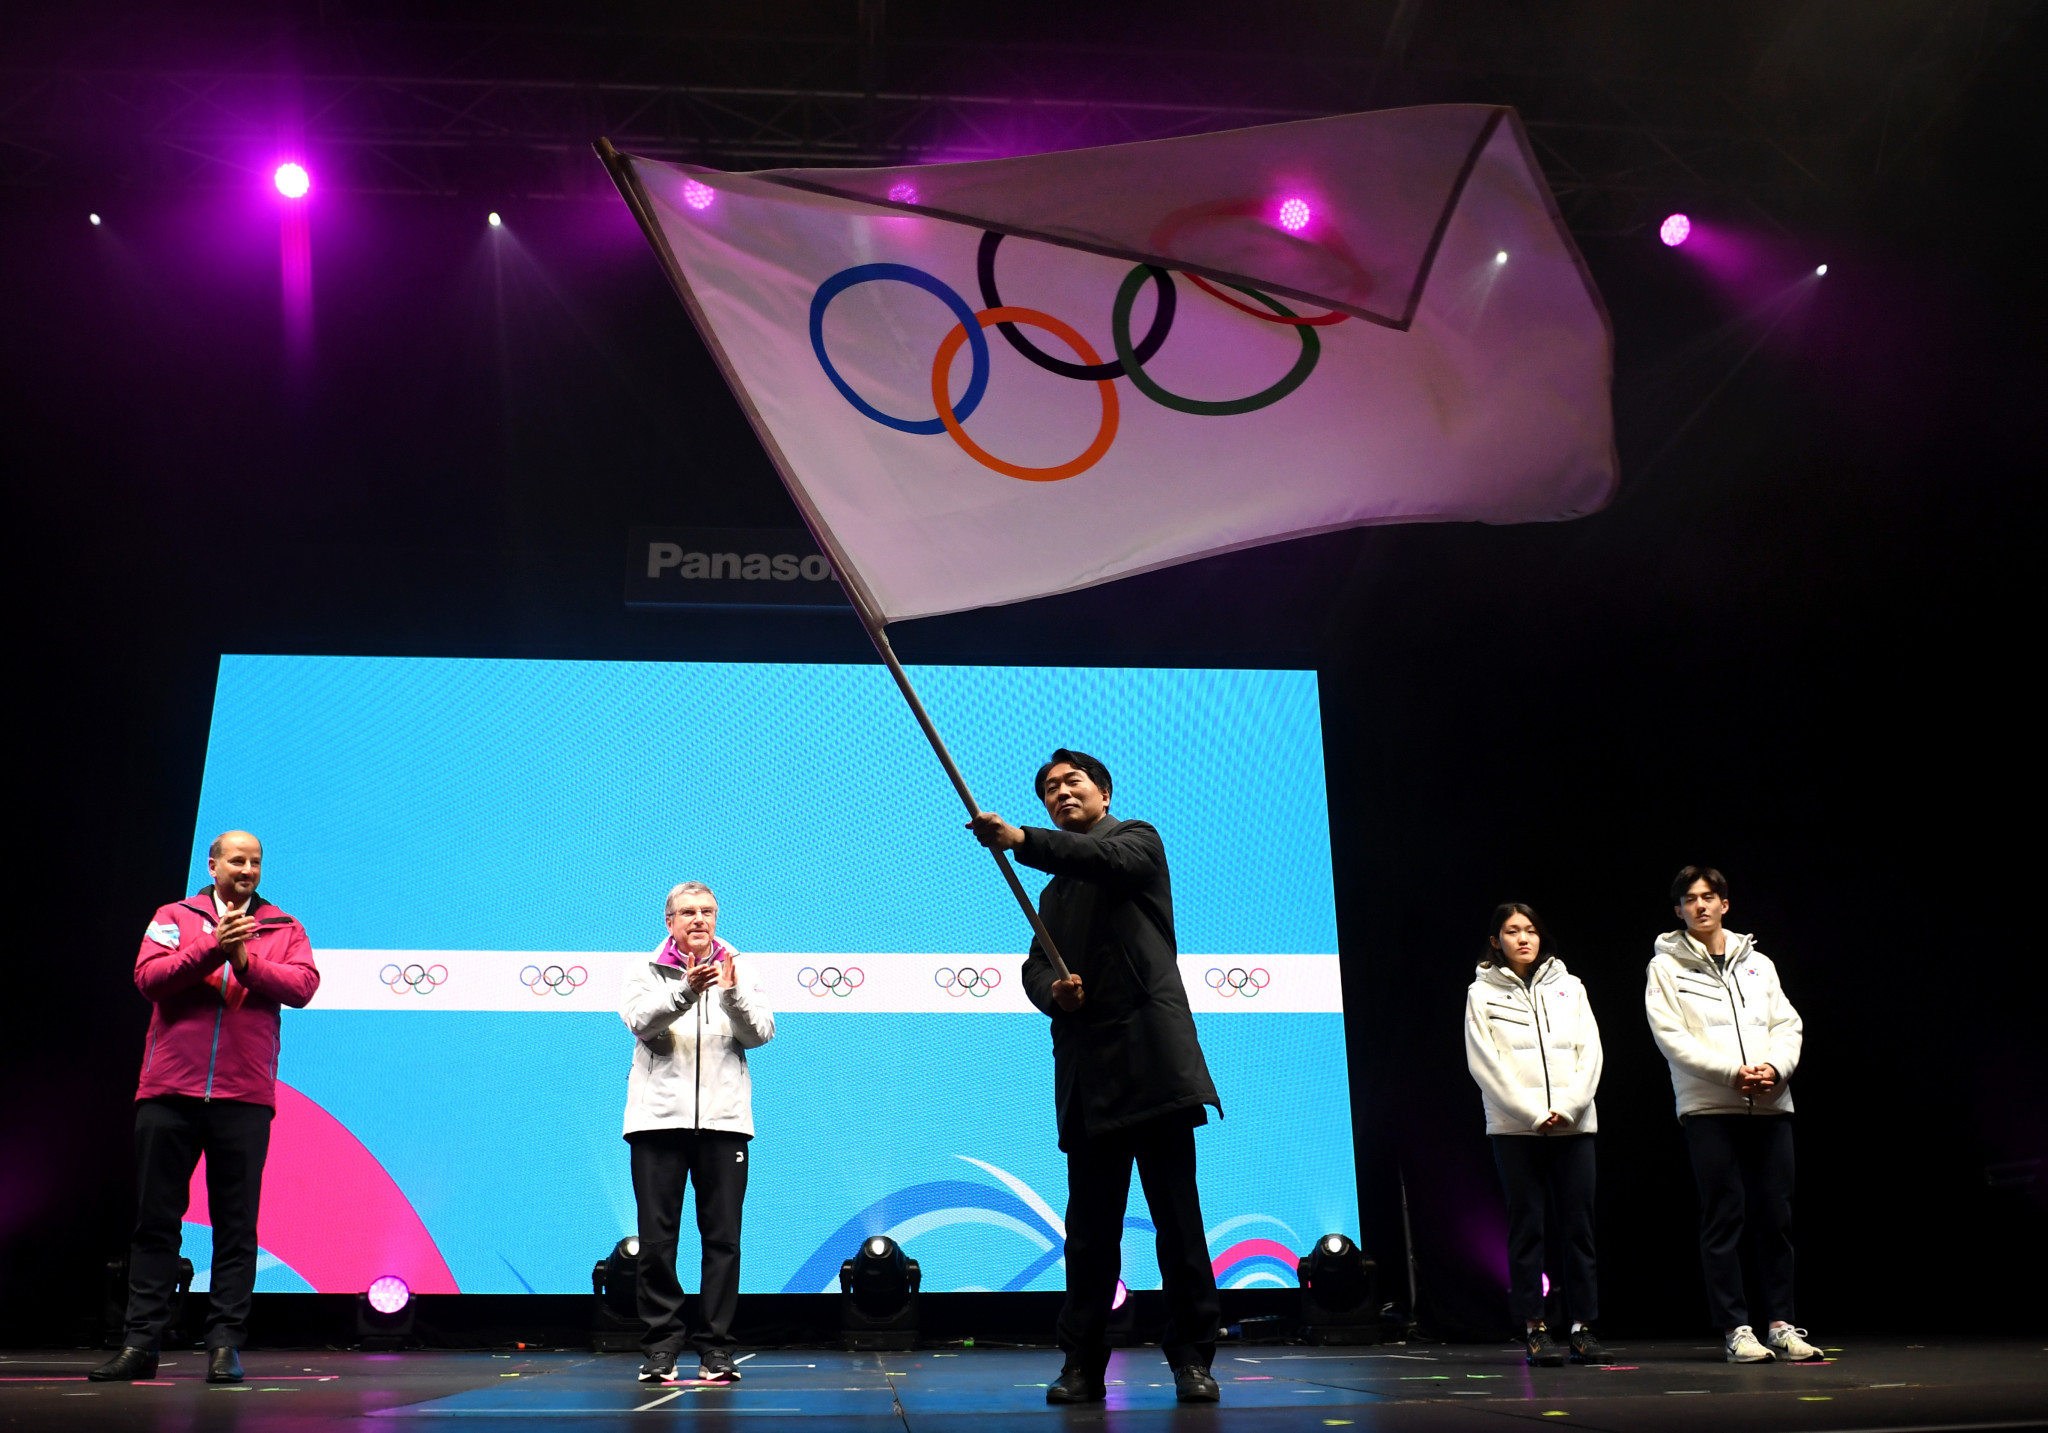 Gangwon received the Youth Olympic Flag from the last hosts Lausanne in 2020 ©Getty Images